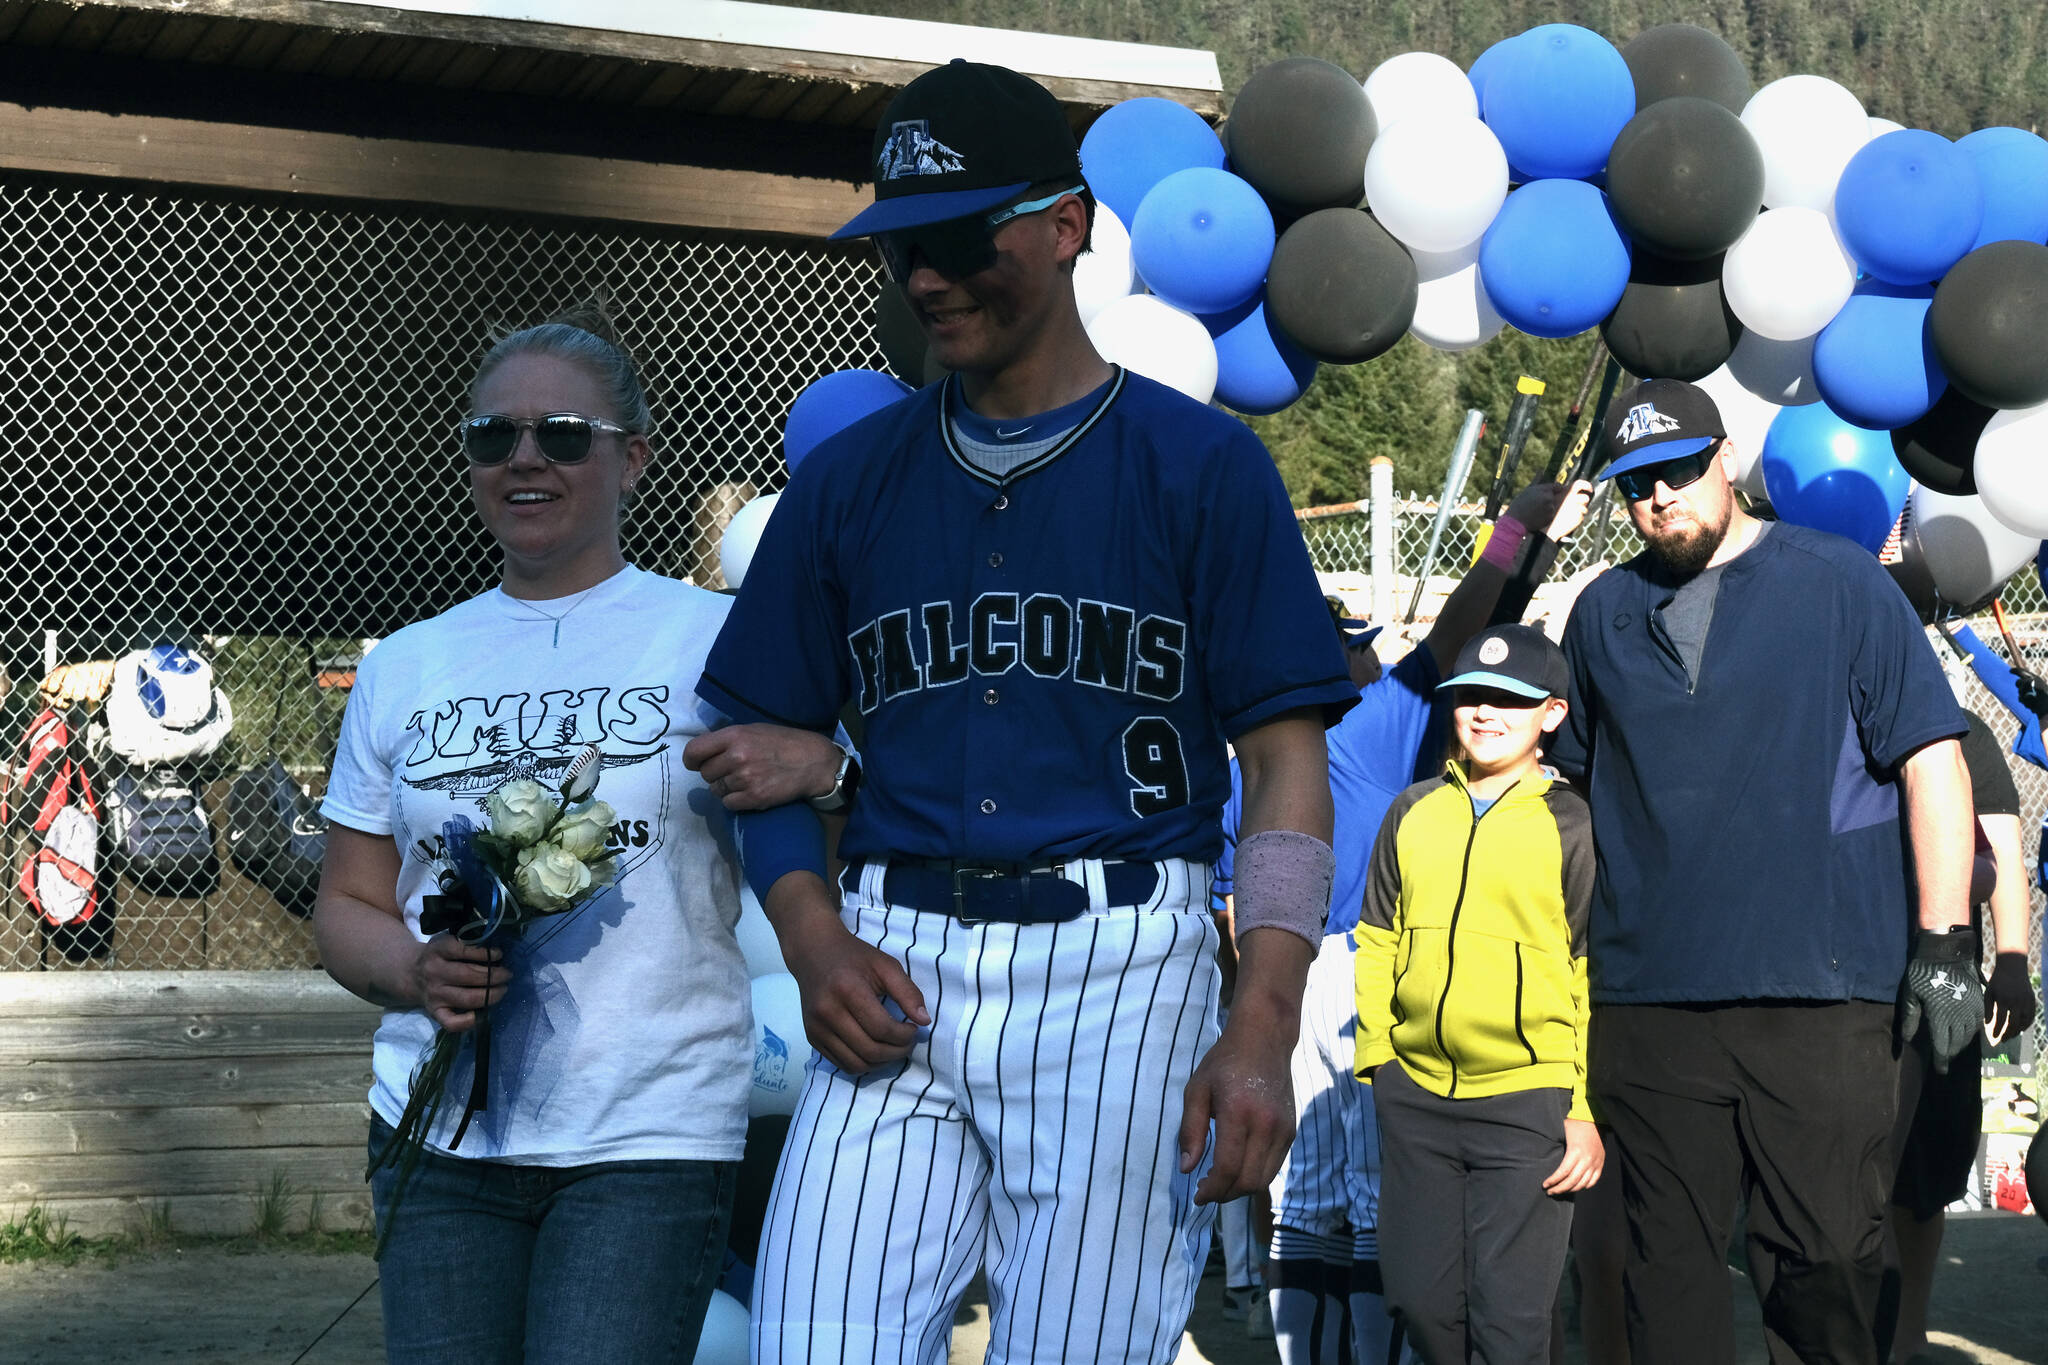 Thunder Mountain Falcons senior Rory Hayes and family were celebrated Wednesday at Adair-Kennedy Field. (Klas Stolpe / Juneau Empire)Thunder Mountain Falcons senior Rory Hayes and family were celebrated Wednesday at Adair-Kennedy Field. (Klas Stolpe / Juneau Empire)